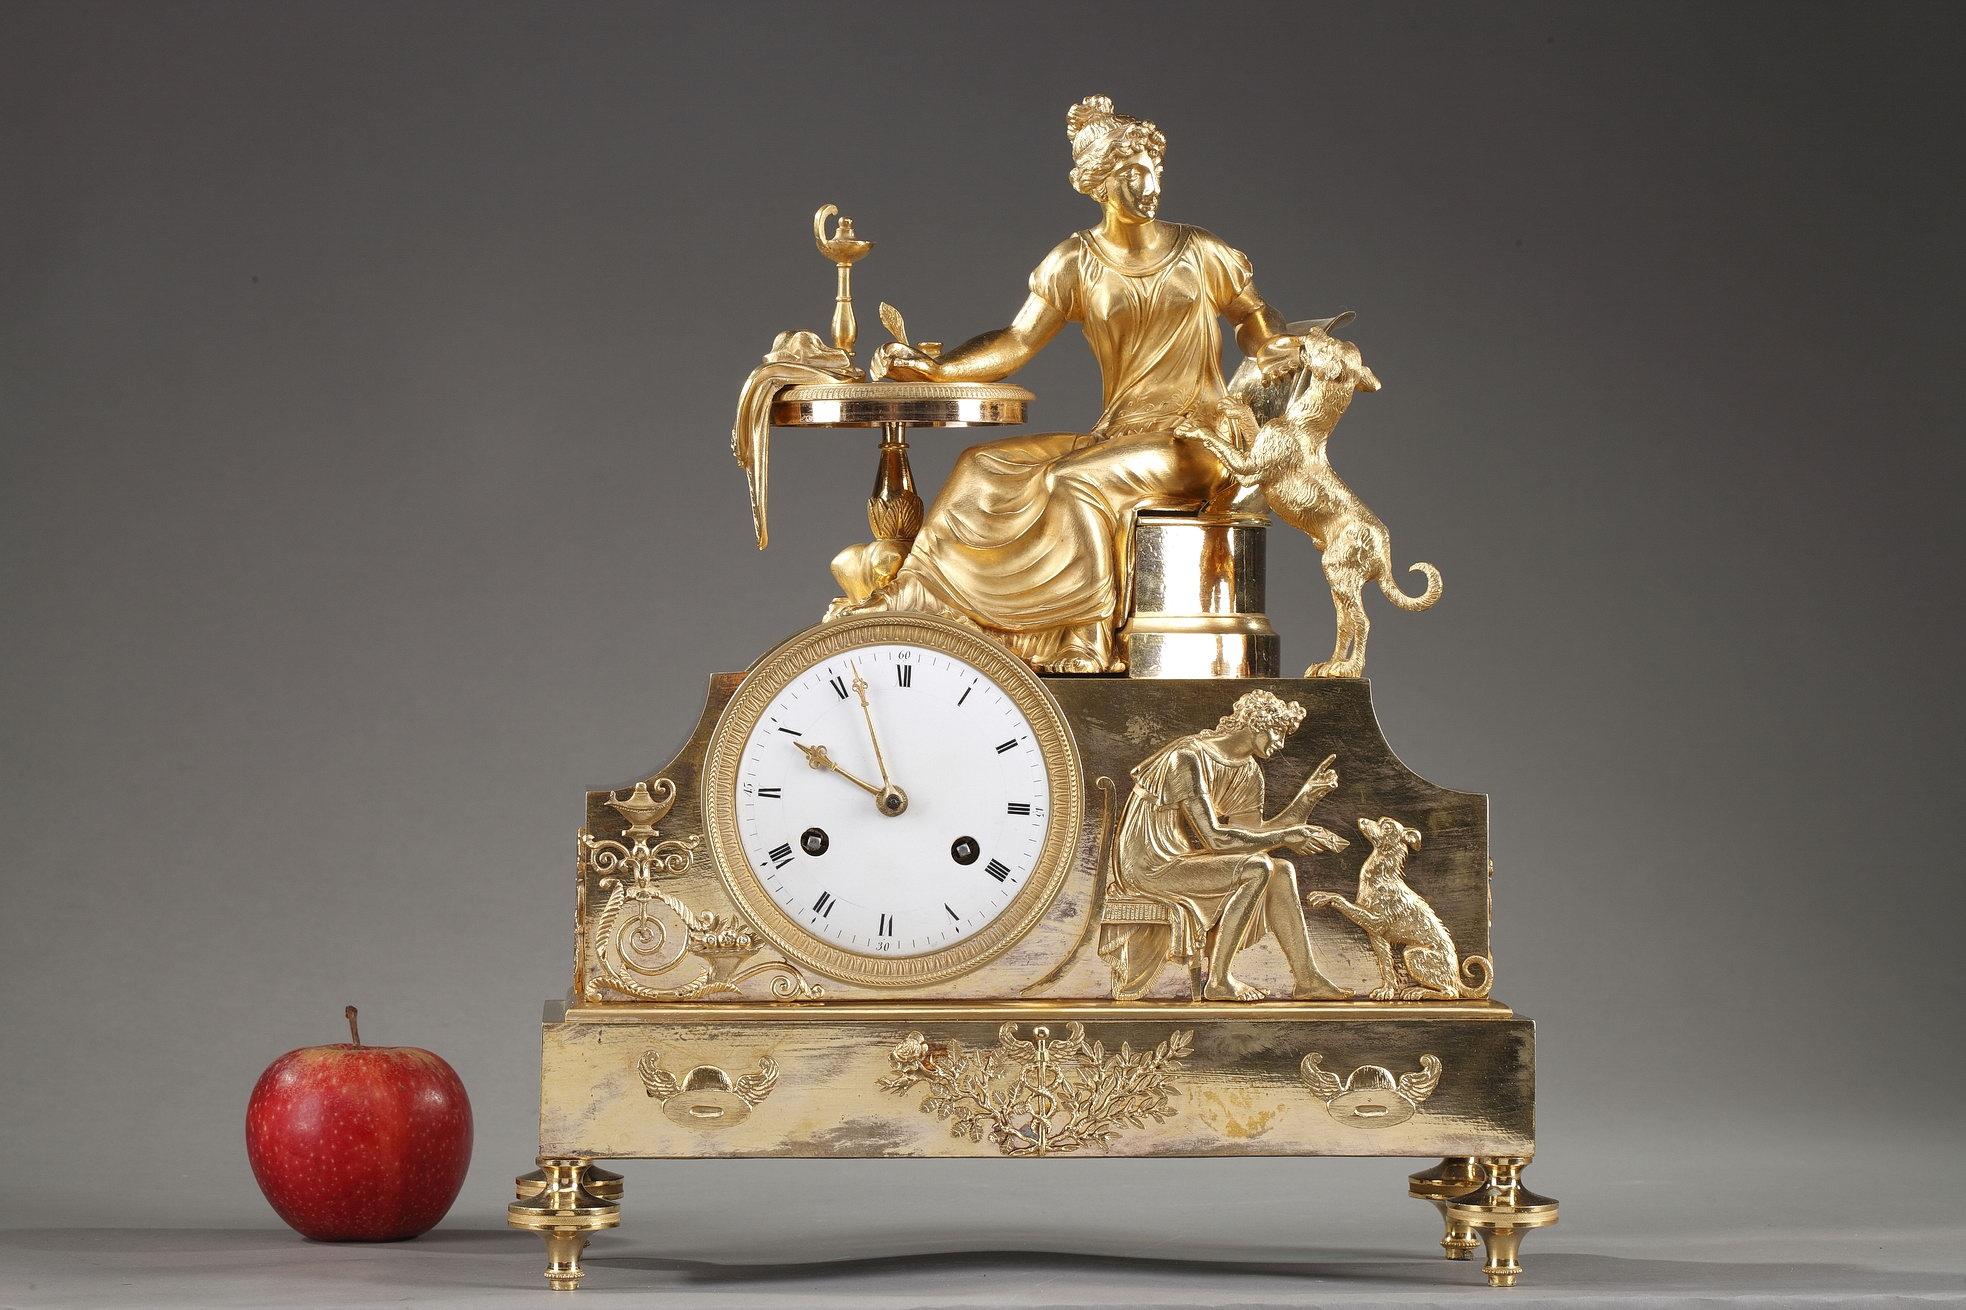 Early 19th century Empire clock crafted of gilt bronze, or ormolu, featuring an allegorical scene with a woman sitting at her work table playing with her dog, symbol of loyalty. The group is set above a raised case containing the dial. On one side